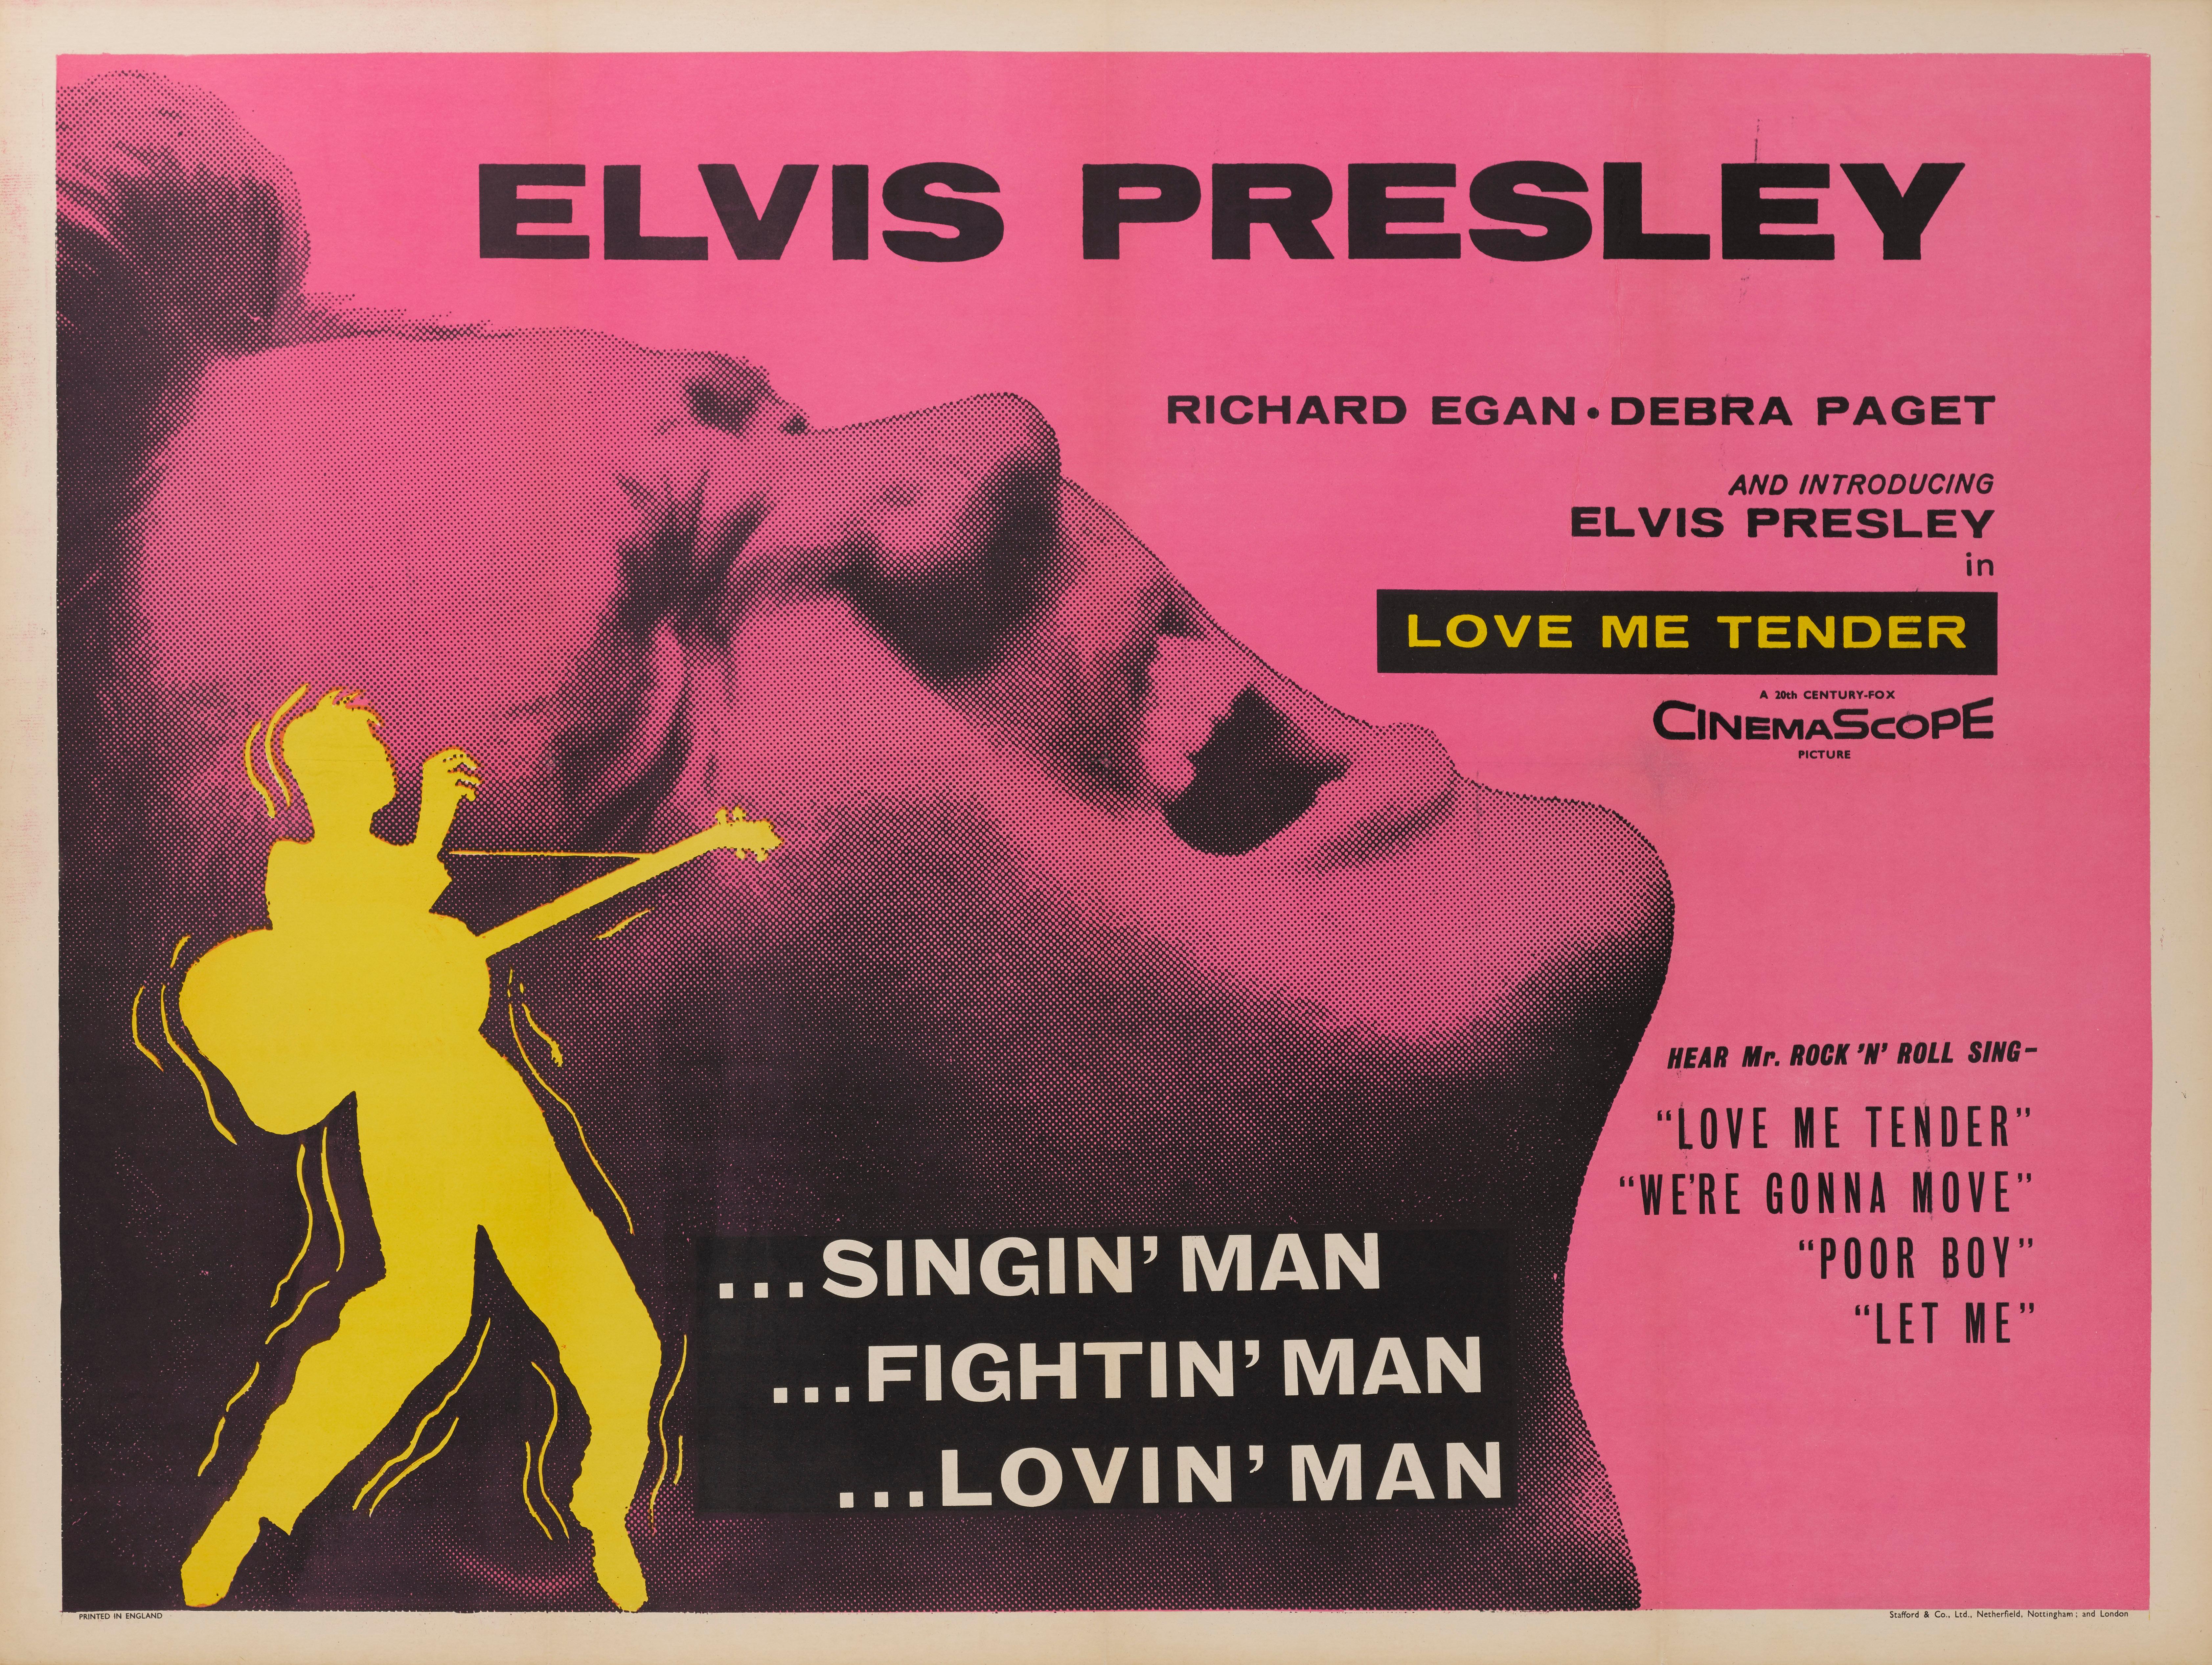 Original British film poster for the 195 film “Love Me Tender. This was Elvis Presley's acting debut, and the only time in his acting career that he would not receive top billing. This black and white film was directed by Robert D. Webb.
The poster